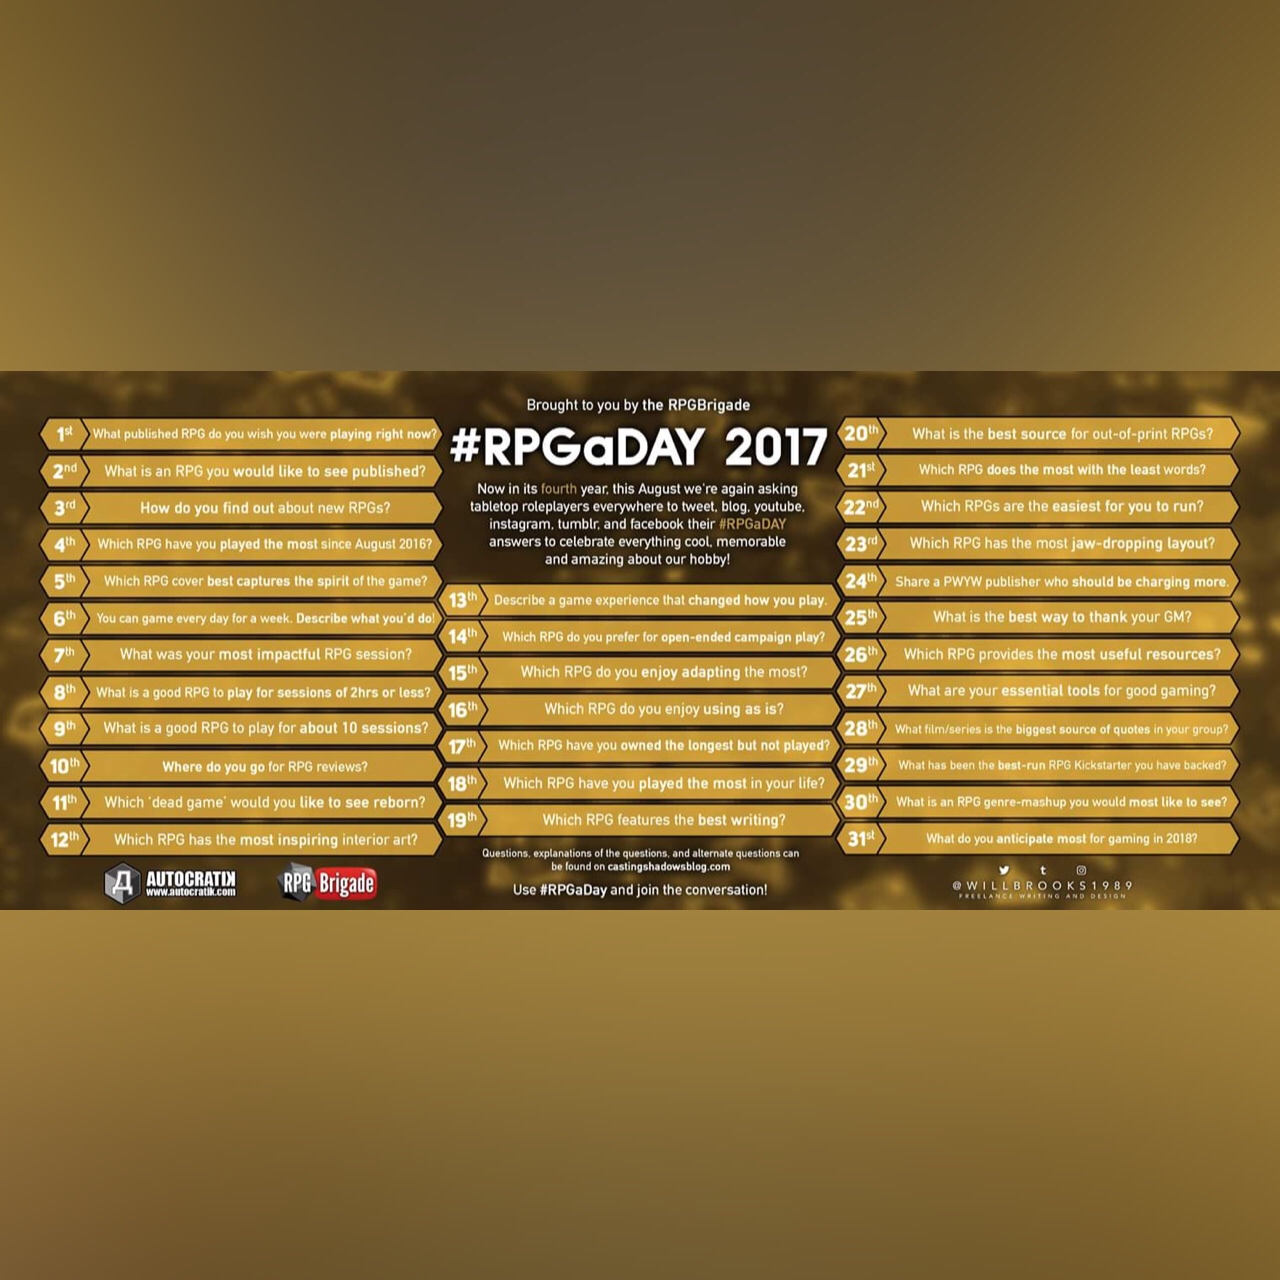 RPGaDAY 2017 August 13th Describe a game experience that changed how you play